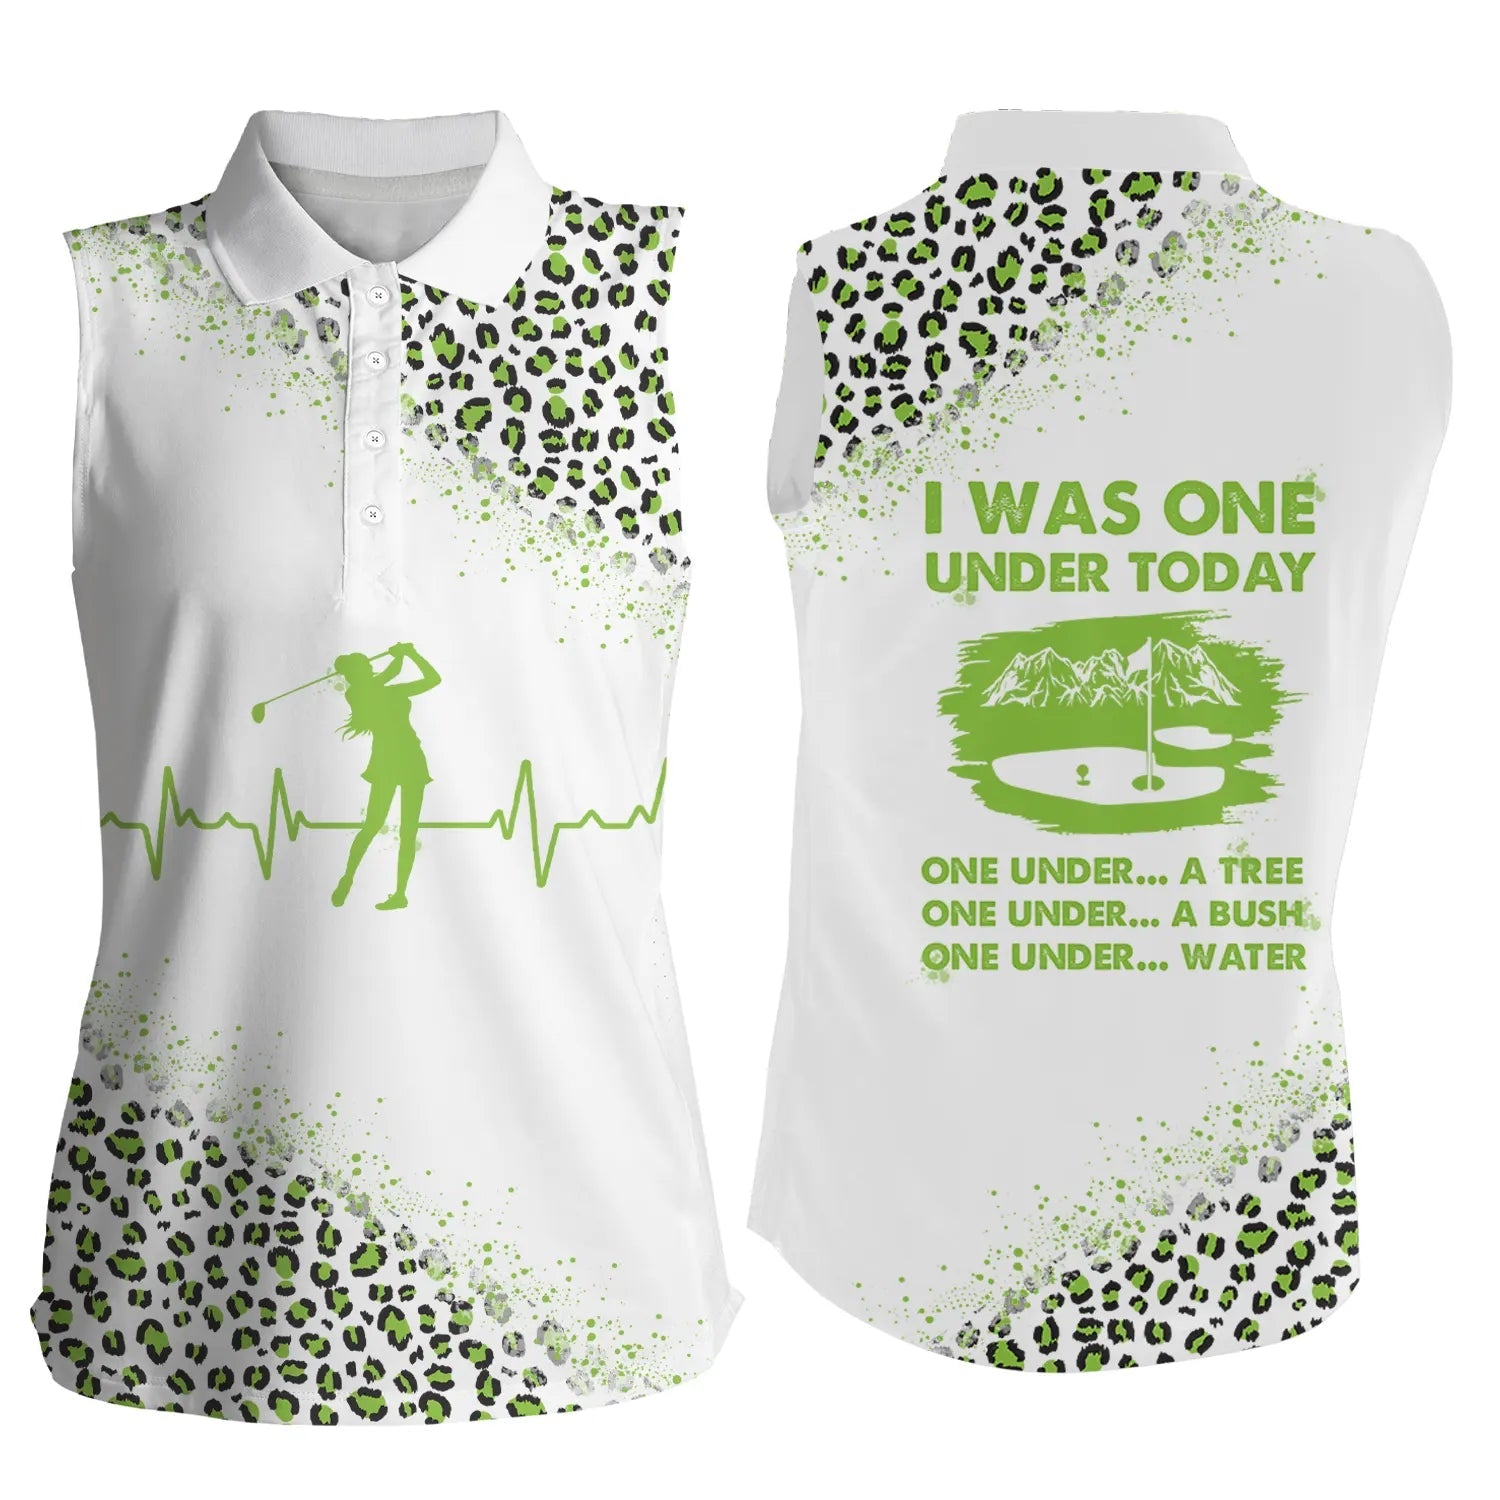 Funny Golf shirts for women I was one under today neon rainbow leopard women Sleeveless polo shirts